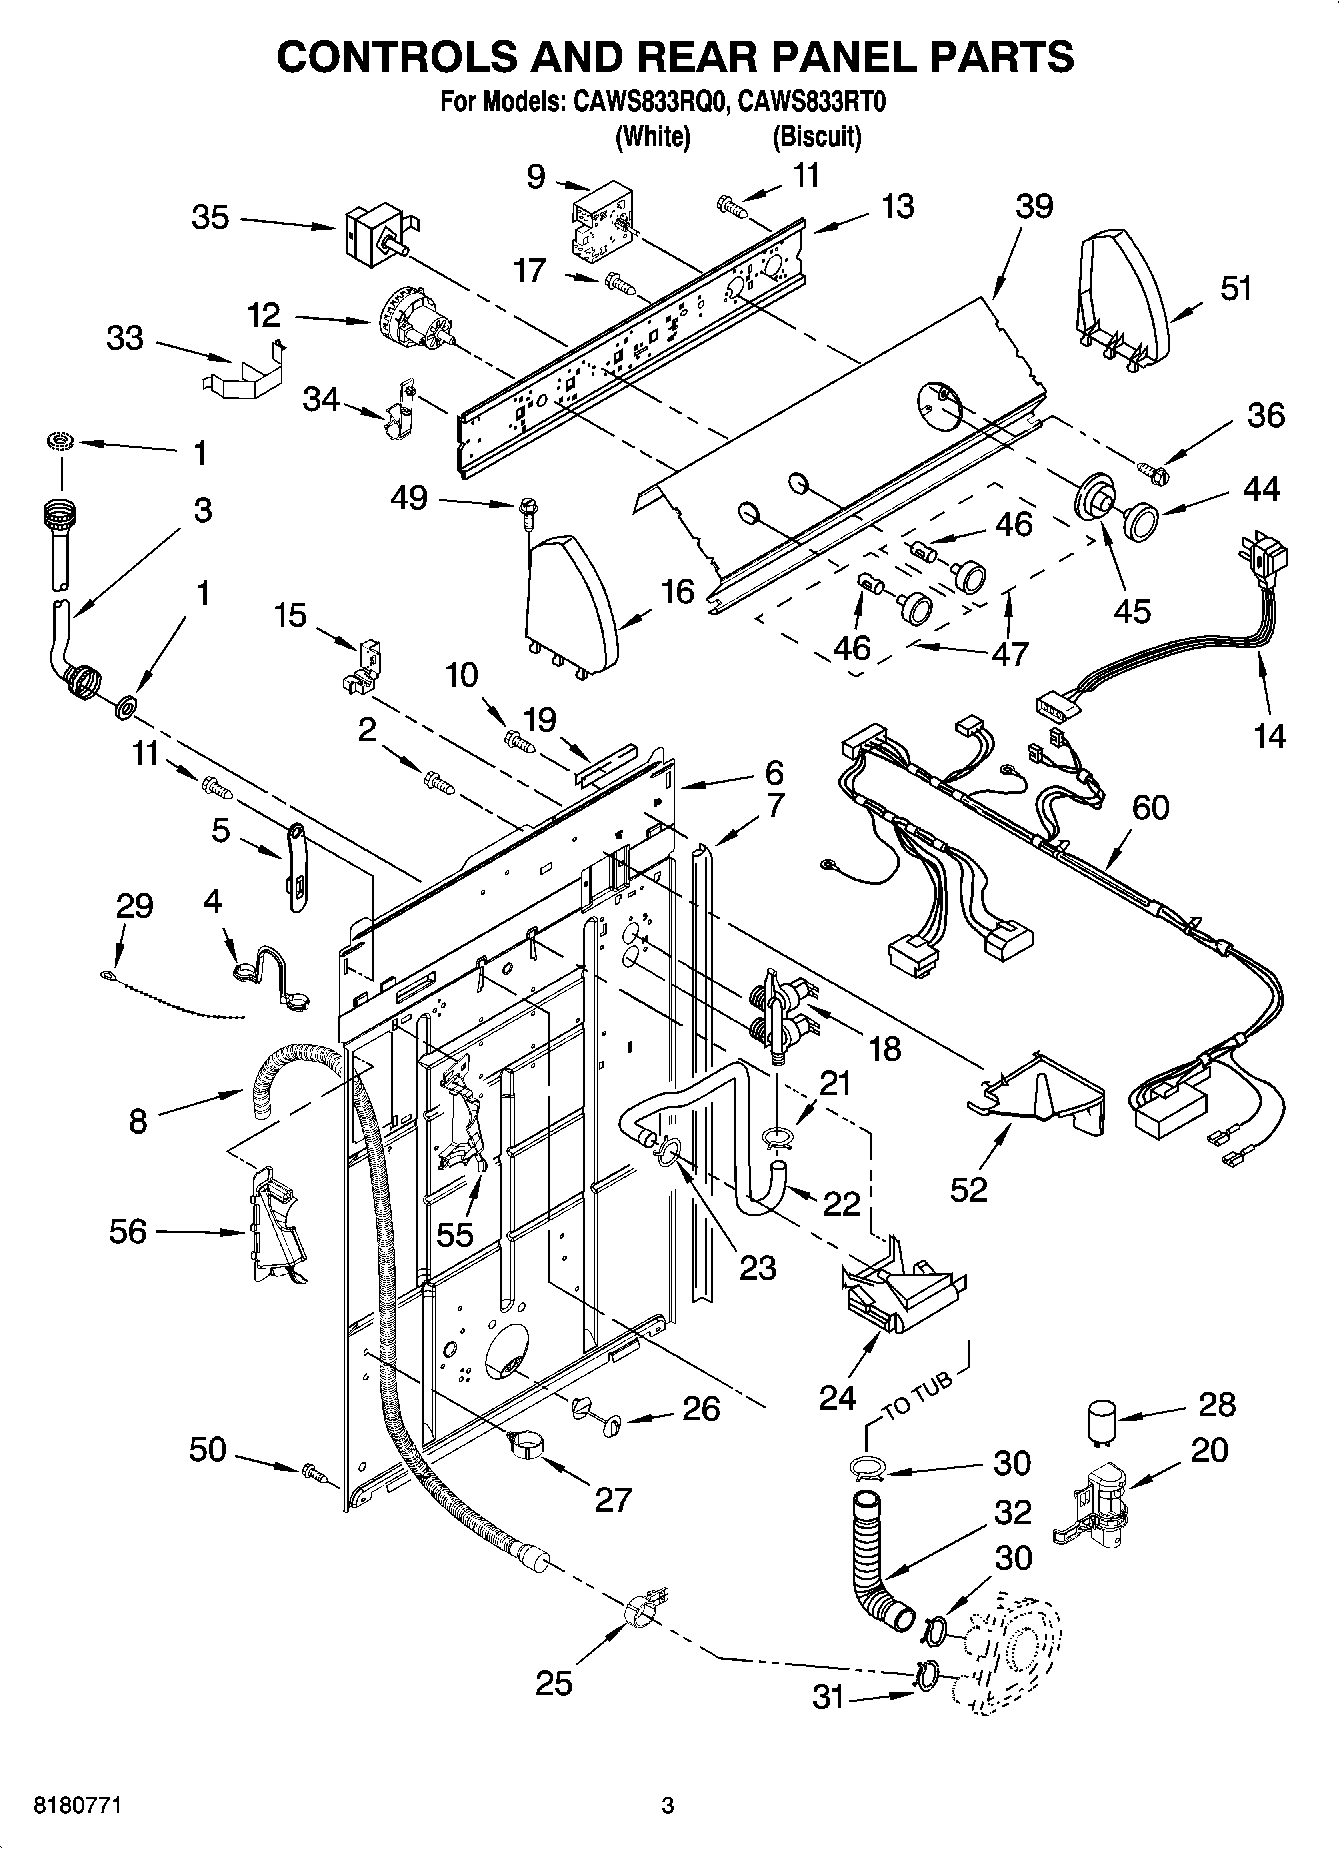 02 - CONTROL AND REAR PANEL PARTS